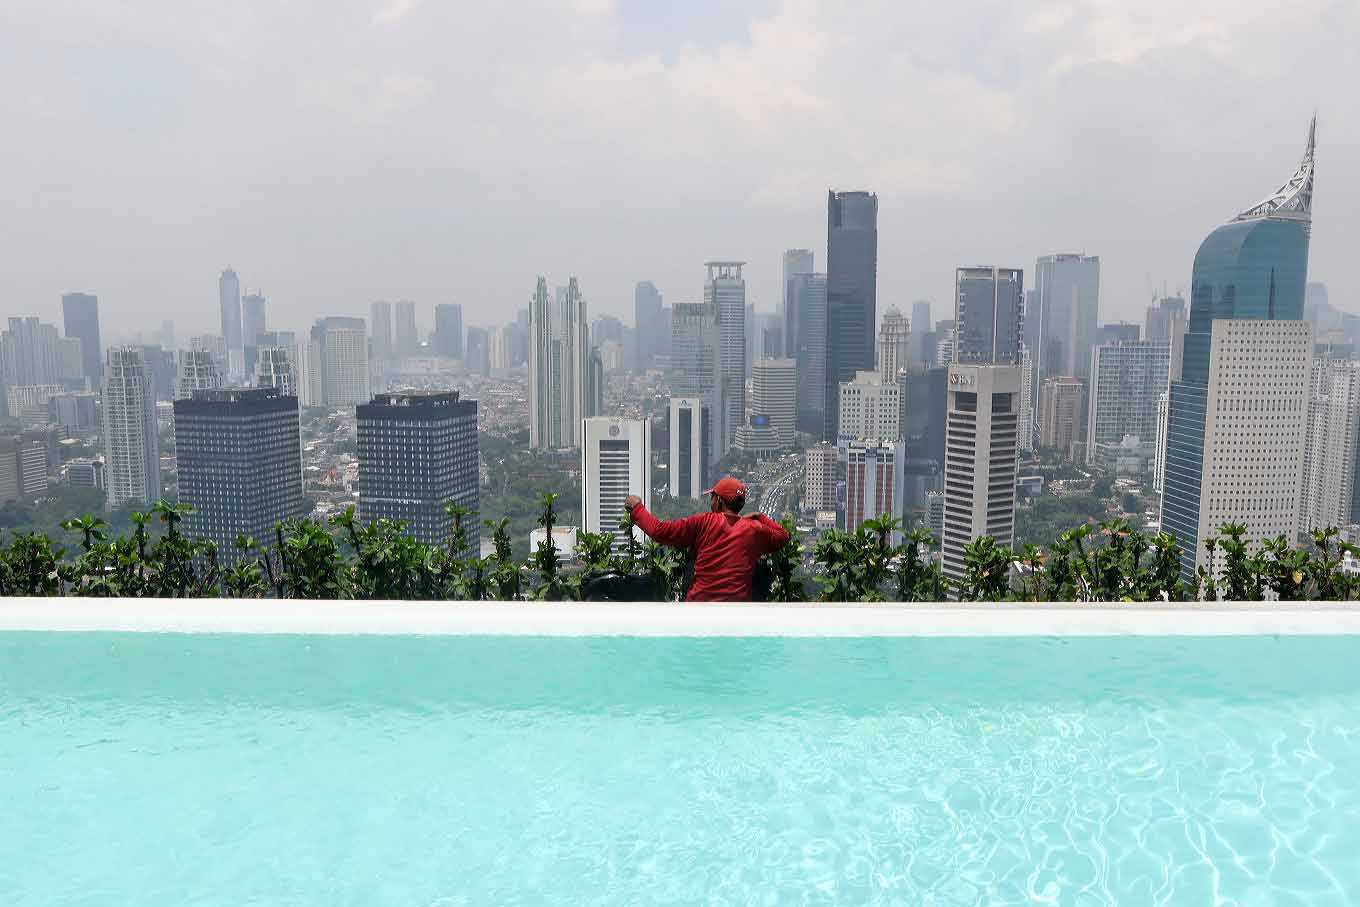 Clouds thicken above Indonesia’s financial growth as uncertainties persist